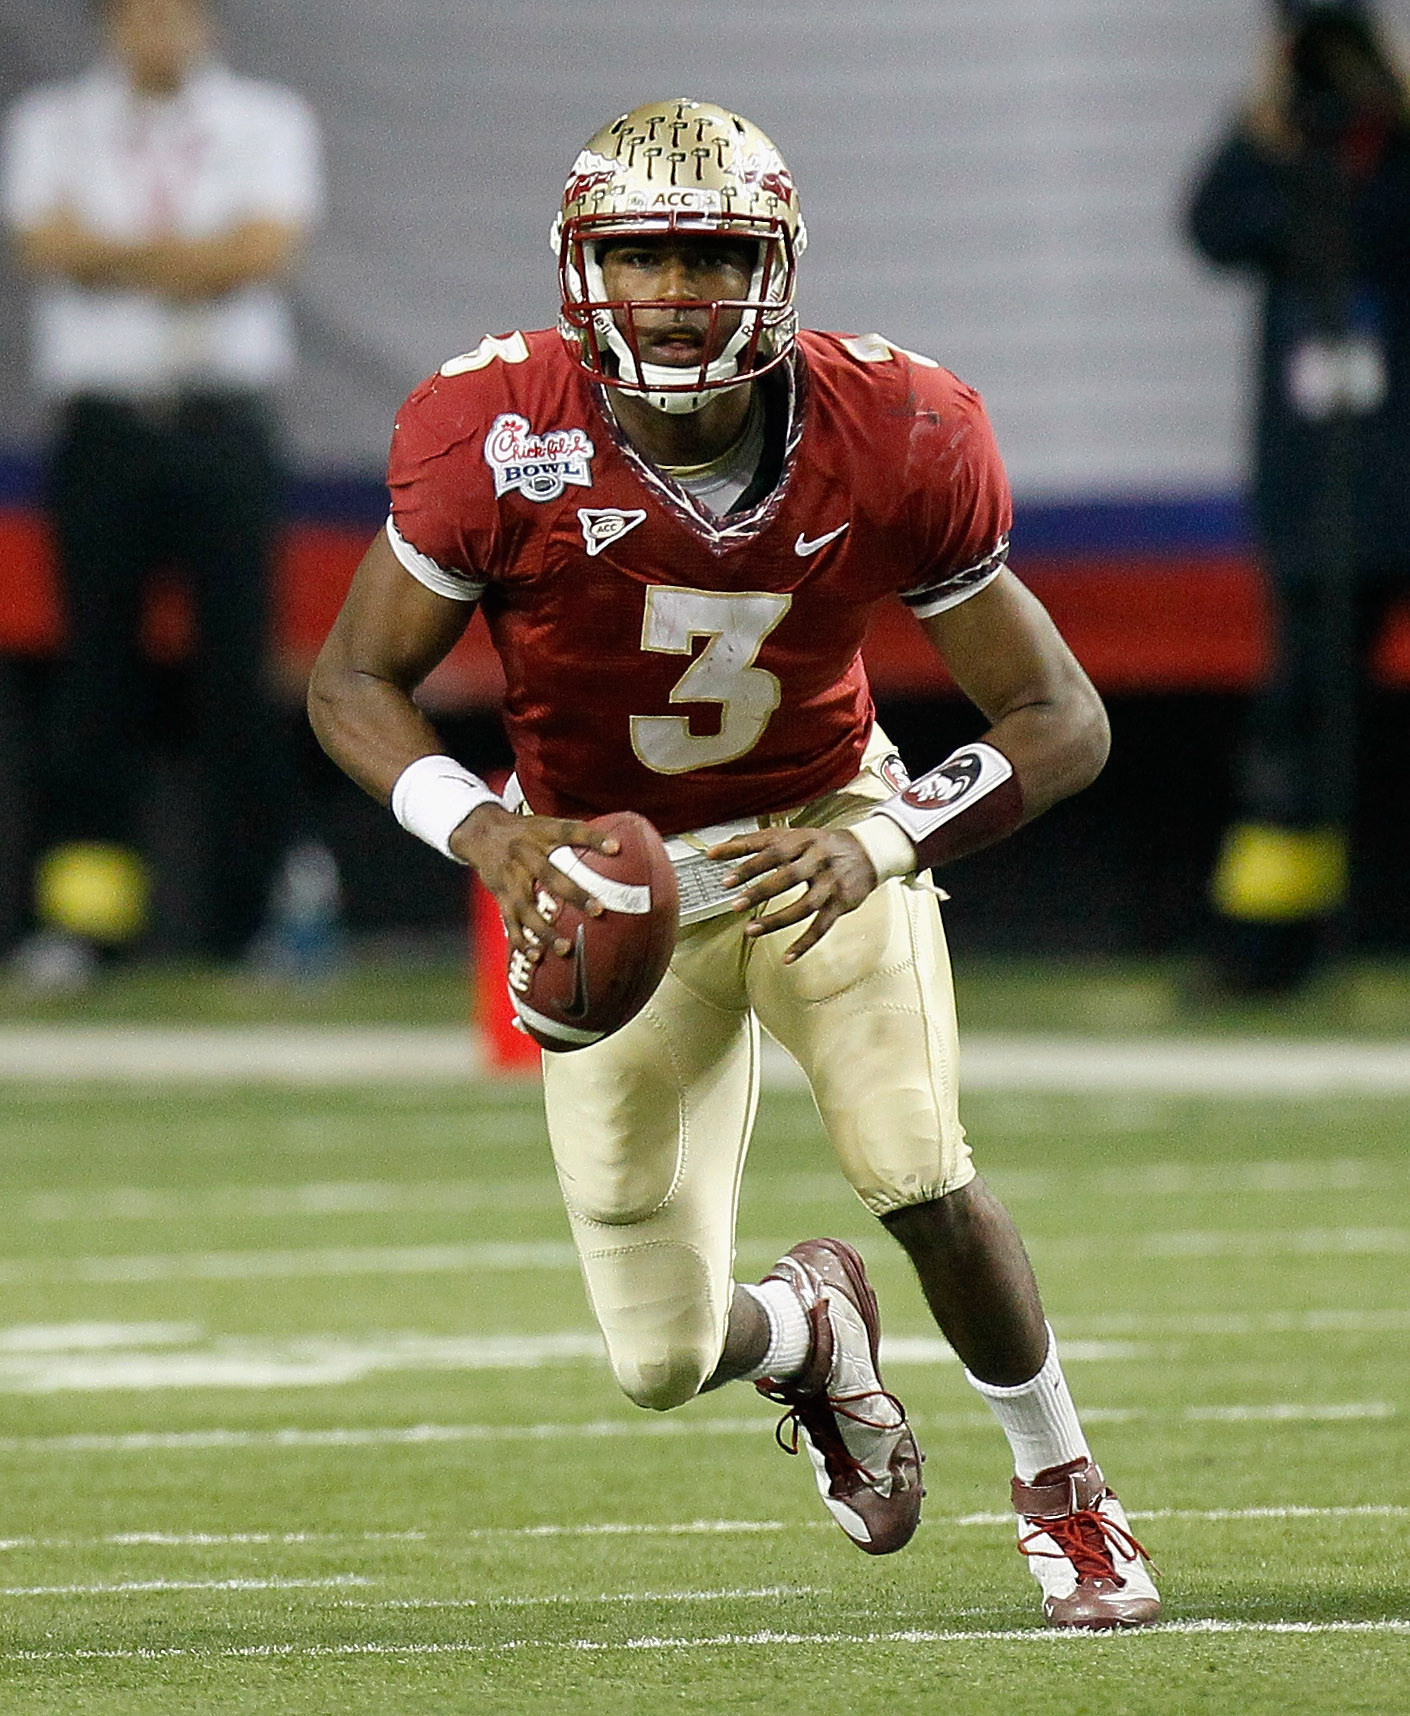 ATLANTA, GA - DECEMBER 31:  EJ Manuel #3 of the Florida State Seminoles against the South Carolina Gamecocks during the 2010 Chick-fil-A Bowl at Georgia Dome on December 31, 2010 in Atlanta, Georgia.  (Photo by Kevin C. Cox/Getty Images)